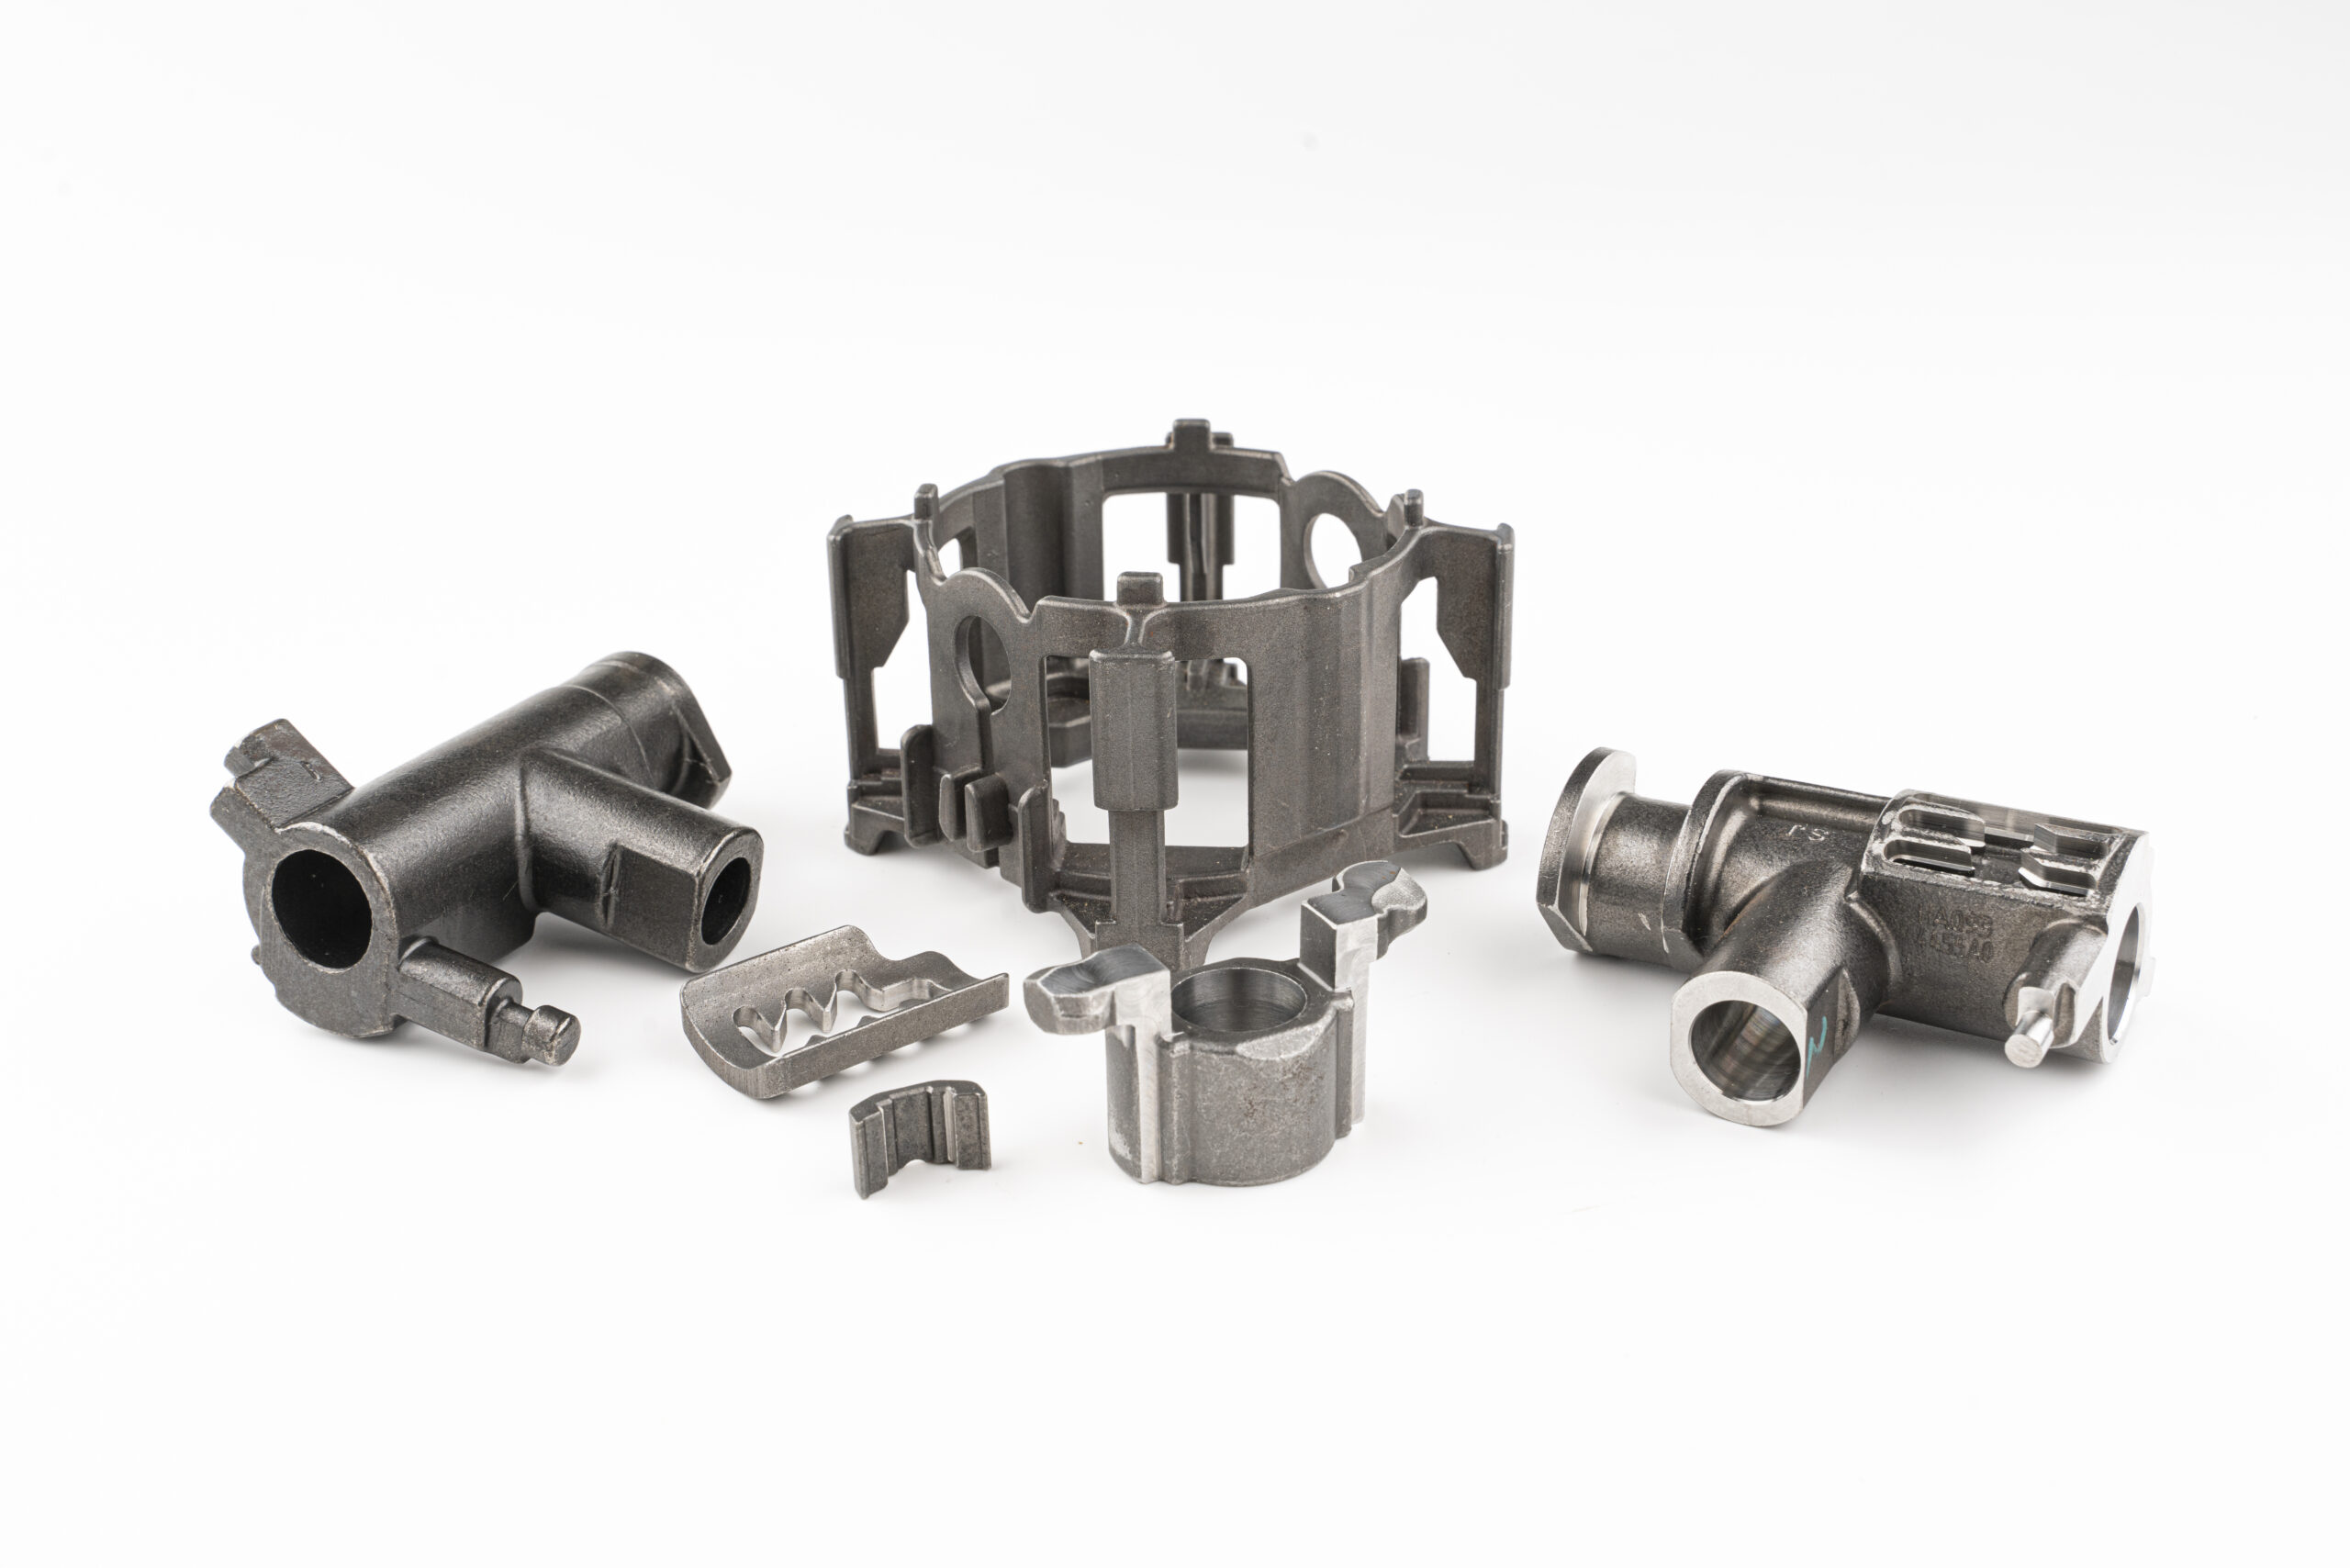 What's the Difference Between Investment Casting and Sand Casting?